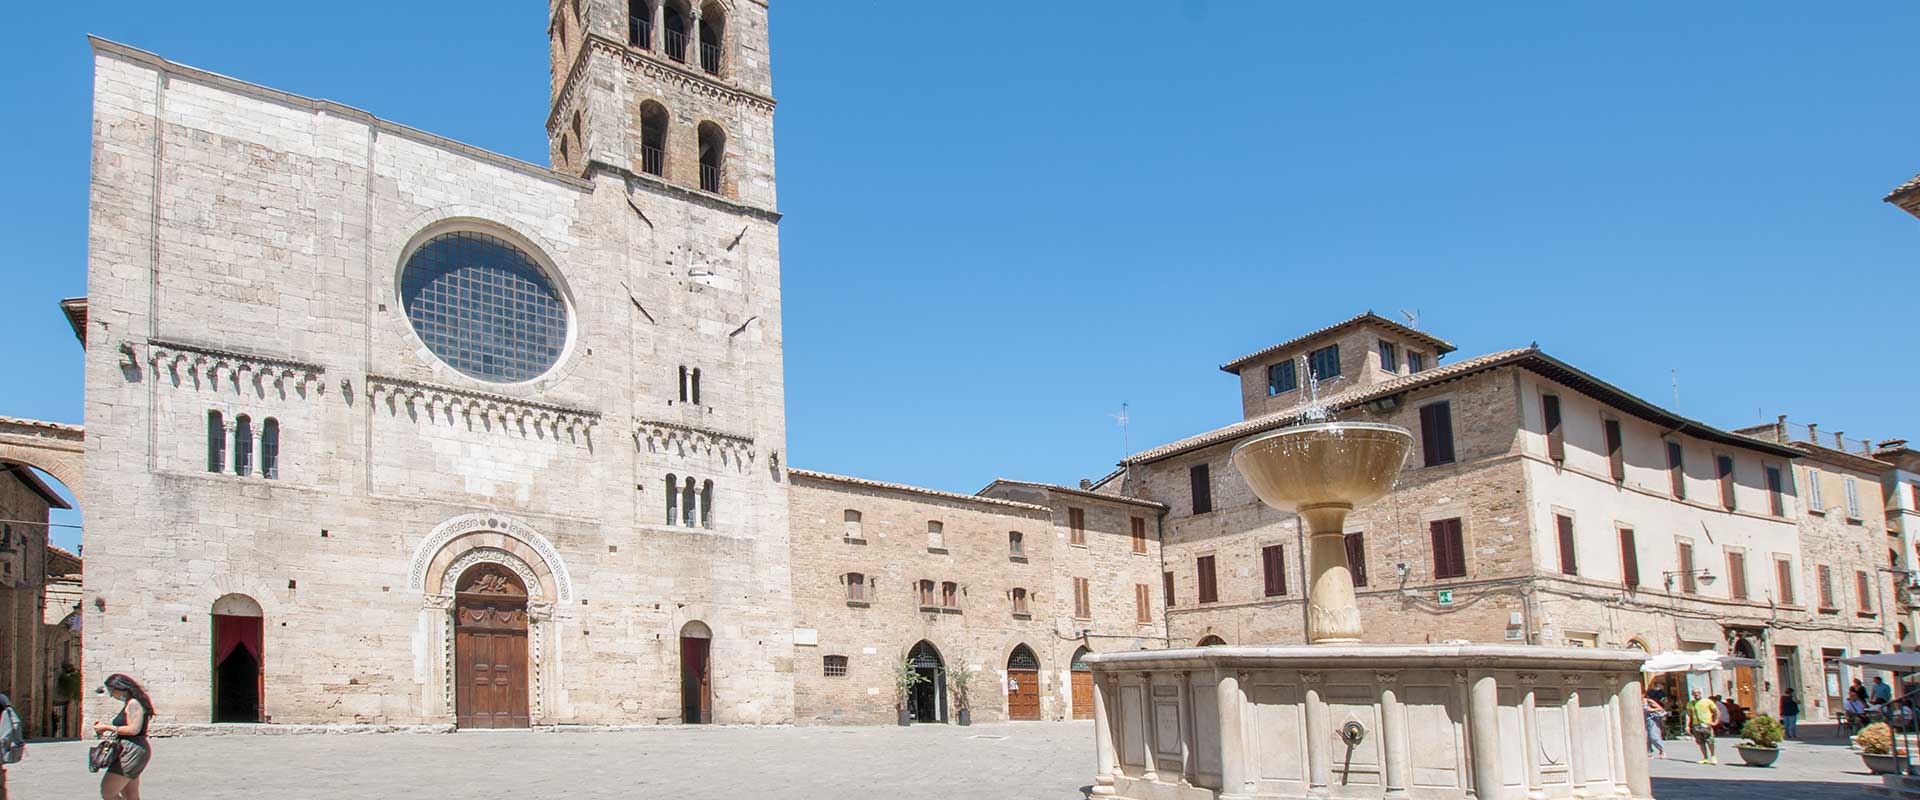 Le Muse Apartments, Holiday home in the historic center of Bevagna, Perugia, Umbria, Italy